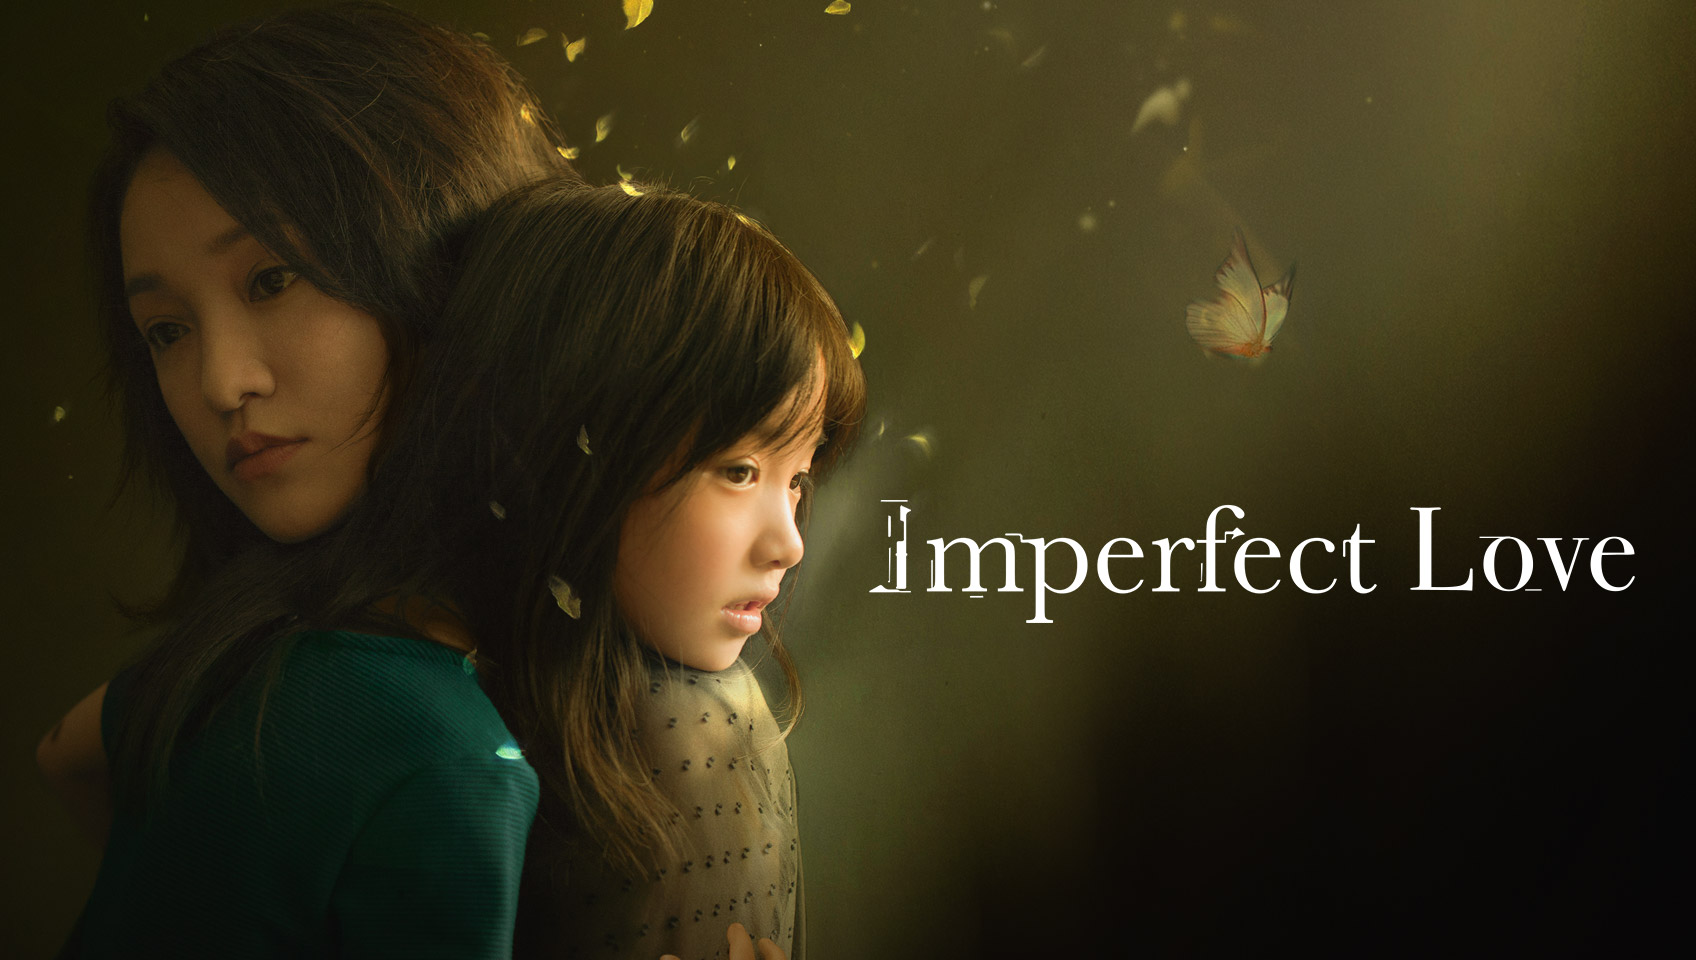 IMPERFECT LOVE